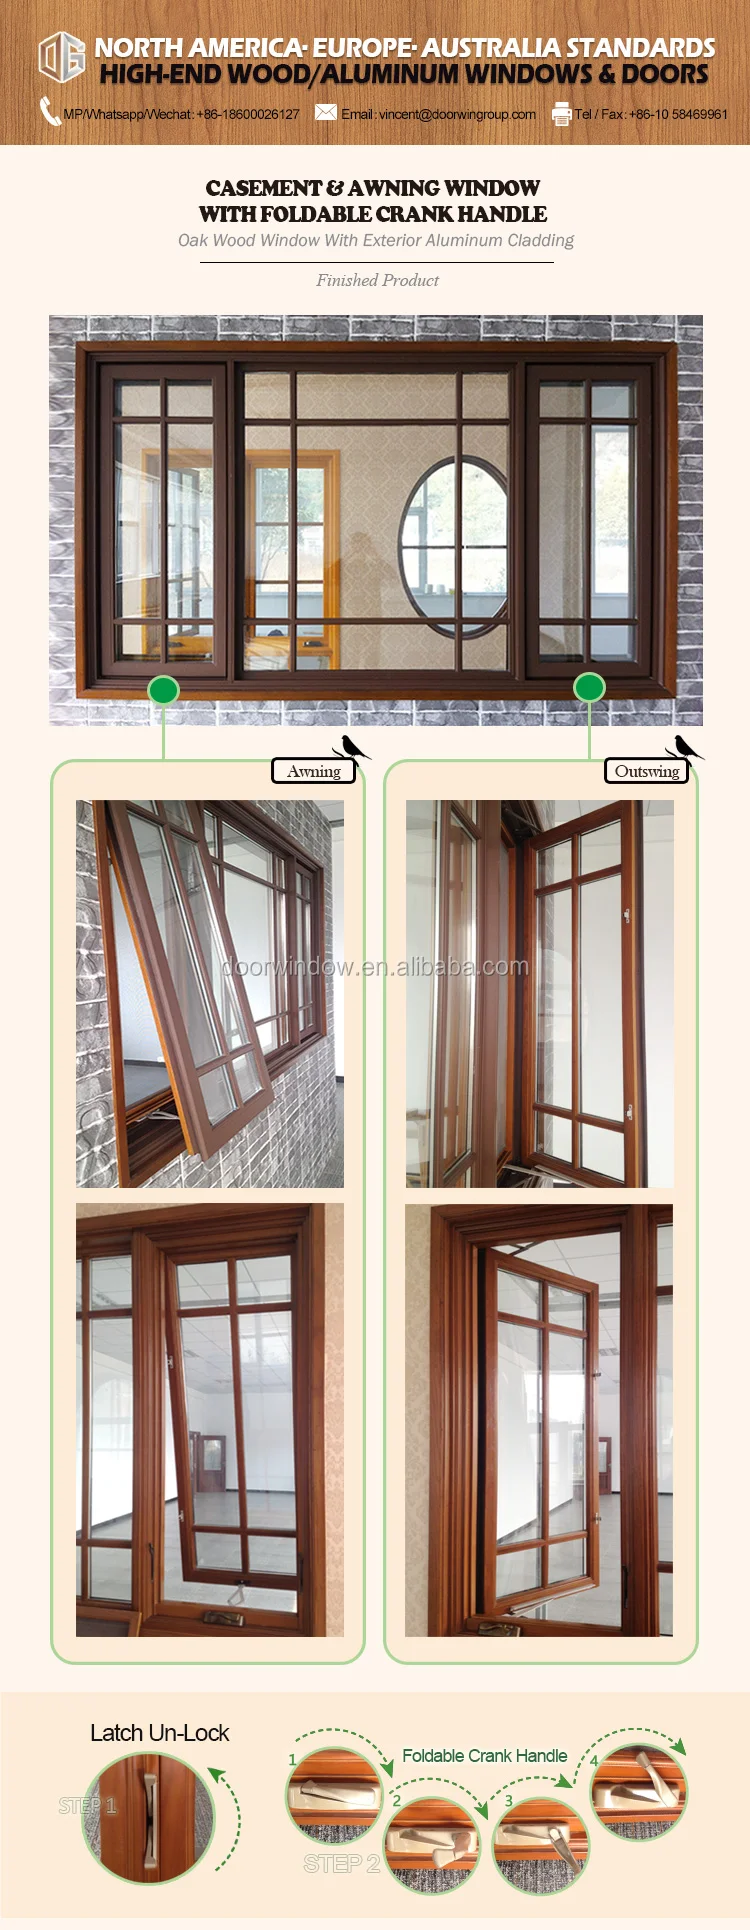 World best selling products wooden windows kent bradford and doors durban